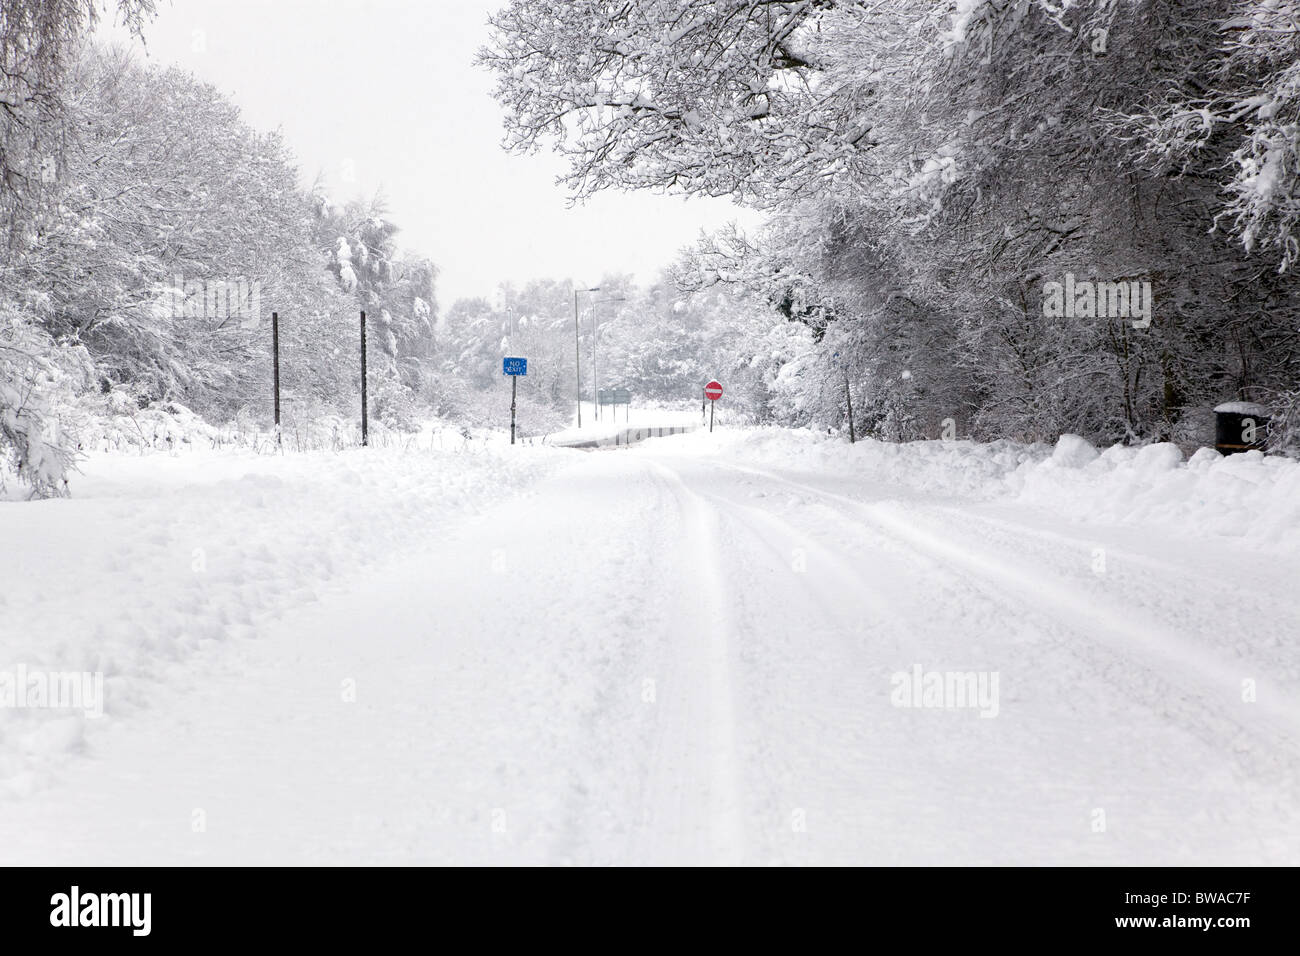 A snow covered road with No Entry and Exit signs in the distance, focus is on the signs. Stock Photo